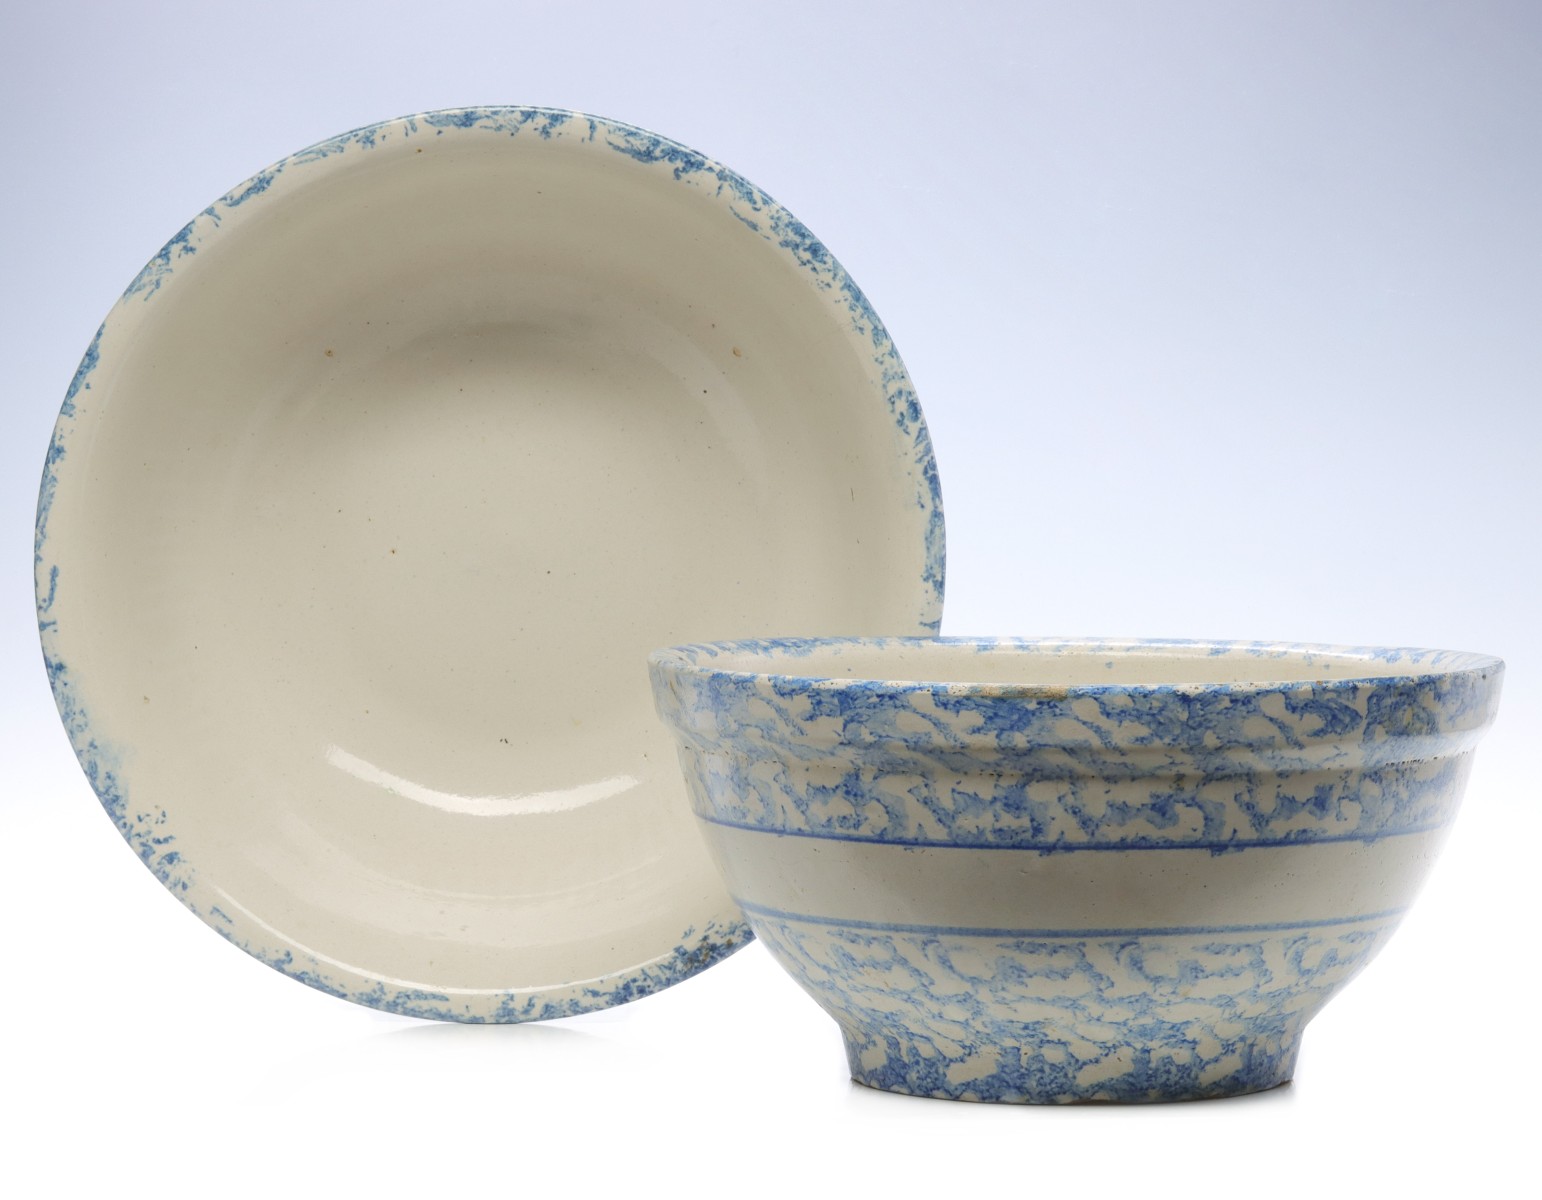 TWO BLUE AND WHITE SPONGEWARE MIXING BOWLS